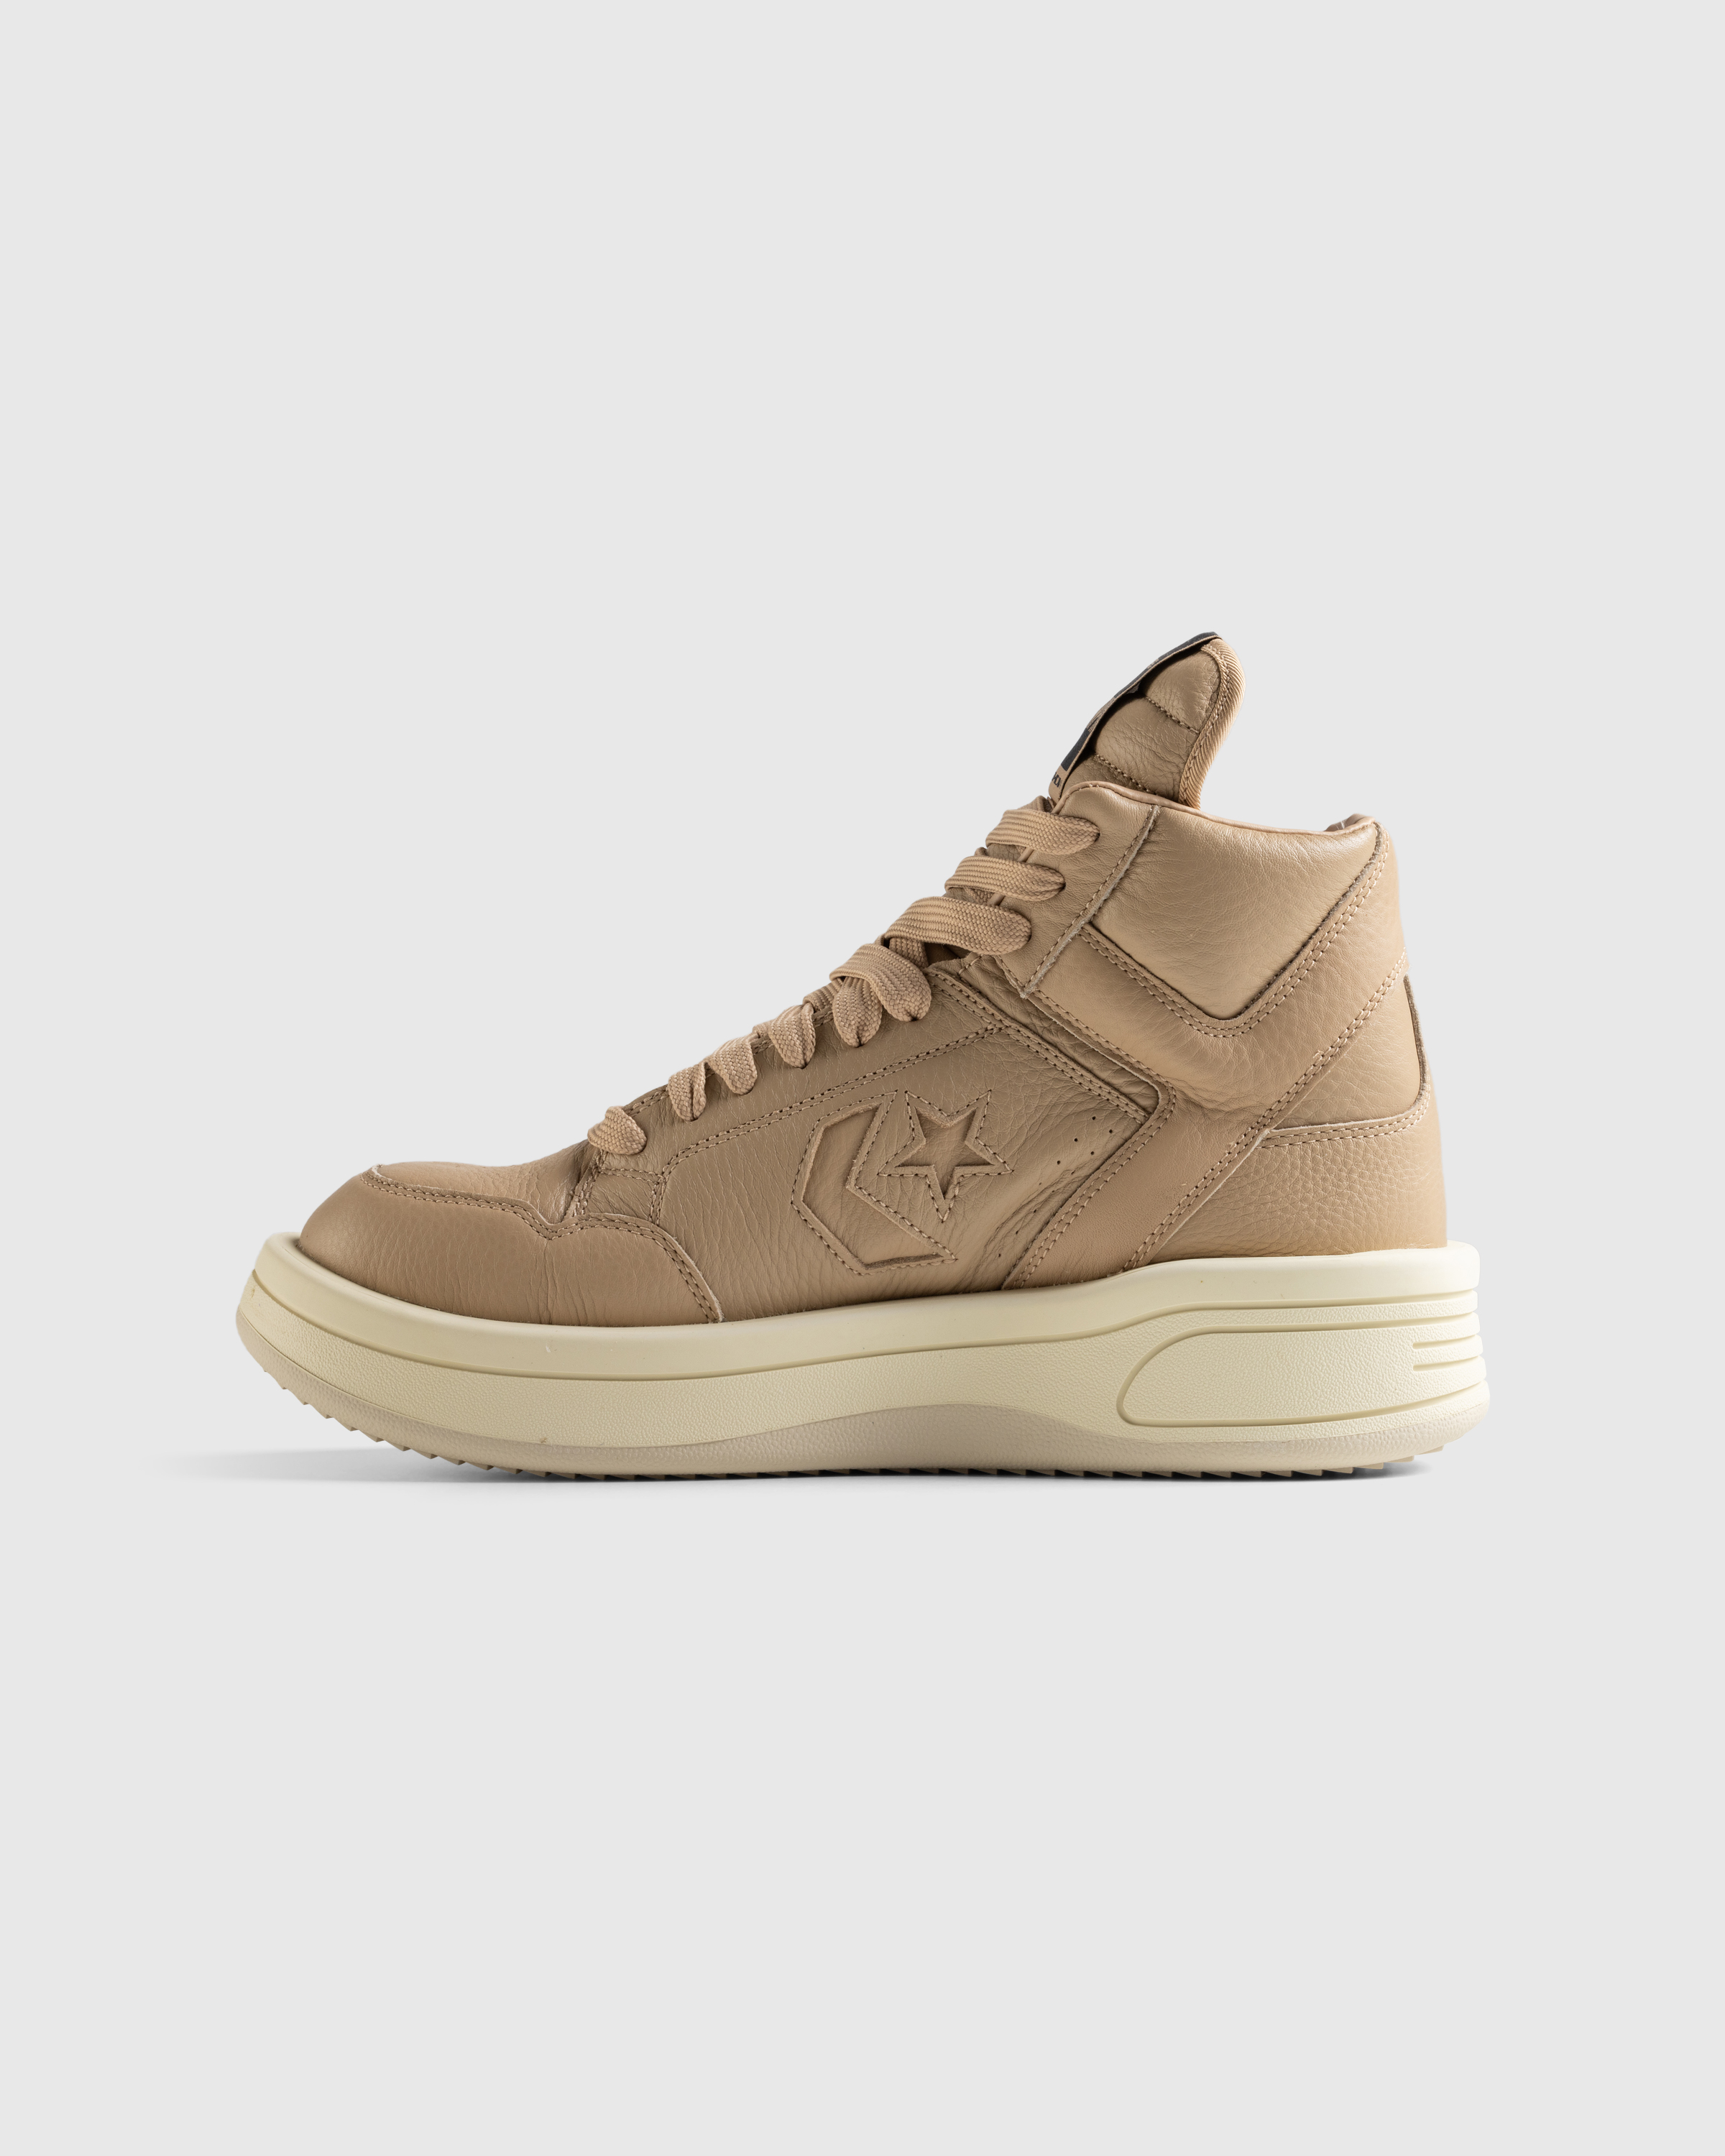 Rick Owens x Converse – TURBOWPN Cave  - High Top Sneakers - Brown - Image 2